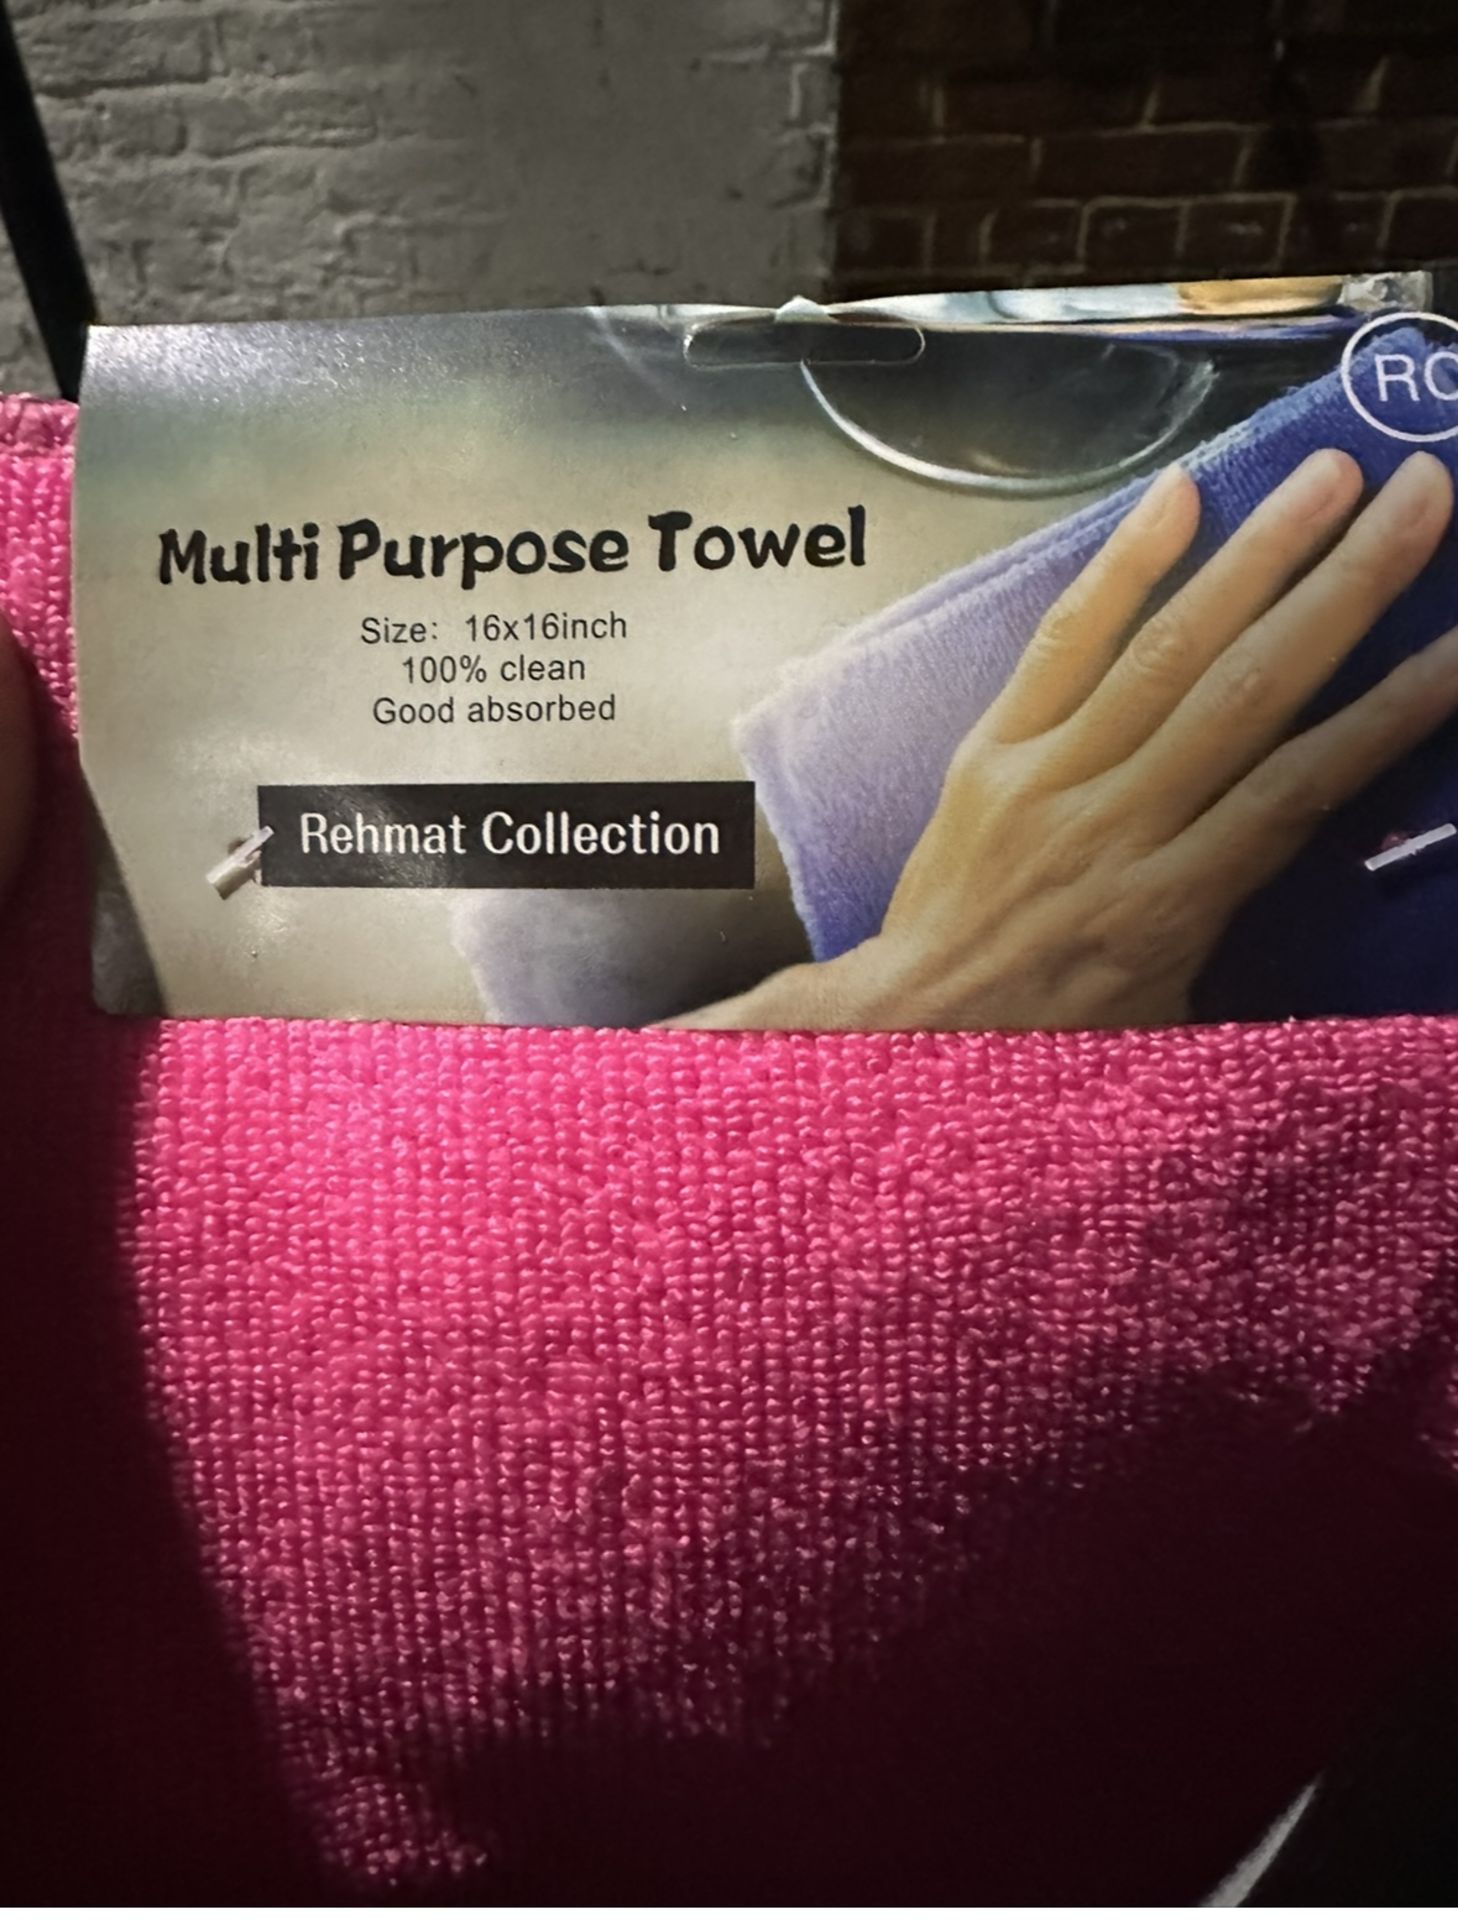 180X MULTI PURPOSE TOWEL 16X16” PACK OF 3 SHOP KEEPER CAR BOOT TTADER - Image 2 of 2